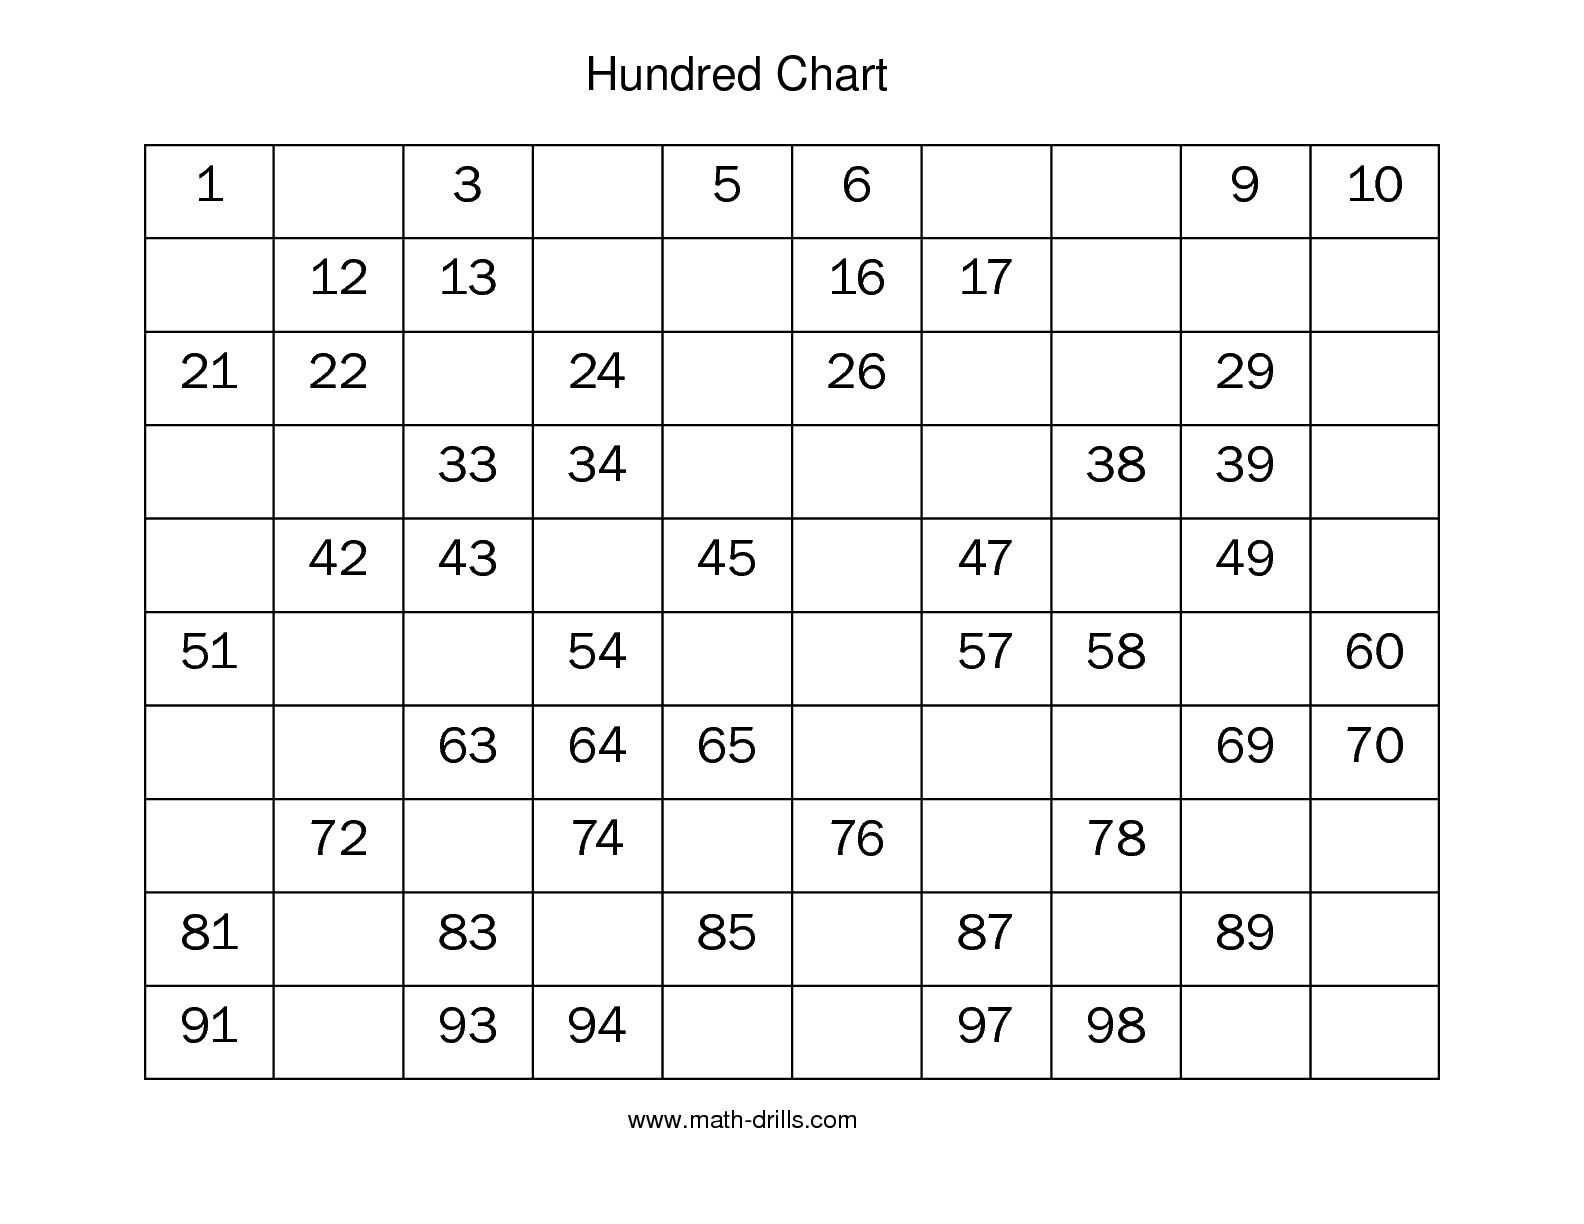 100 Chart with Missing Numbers Image